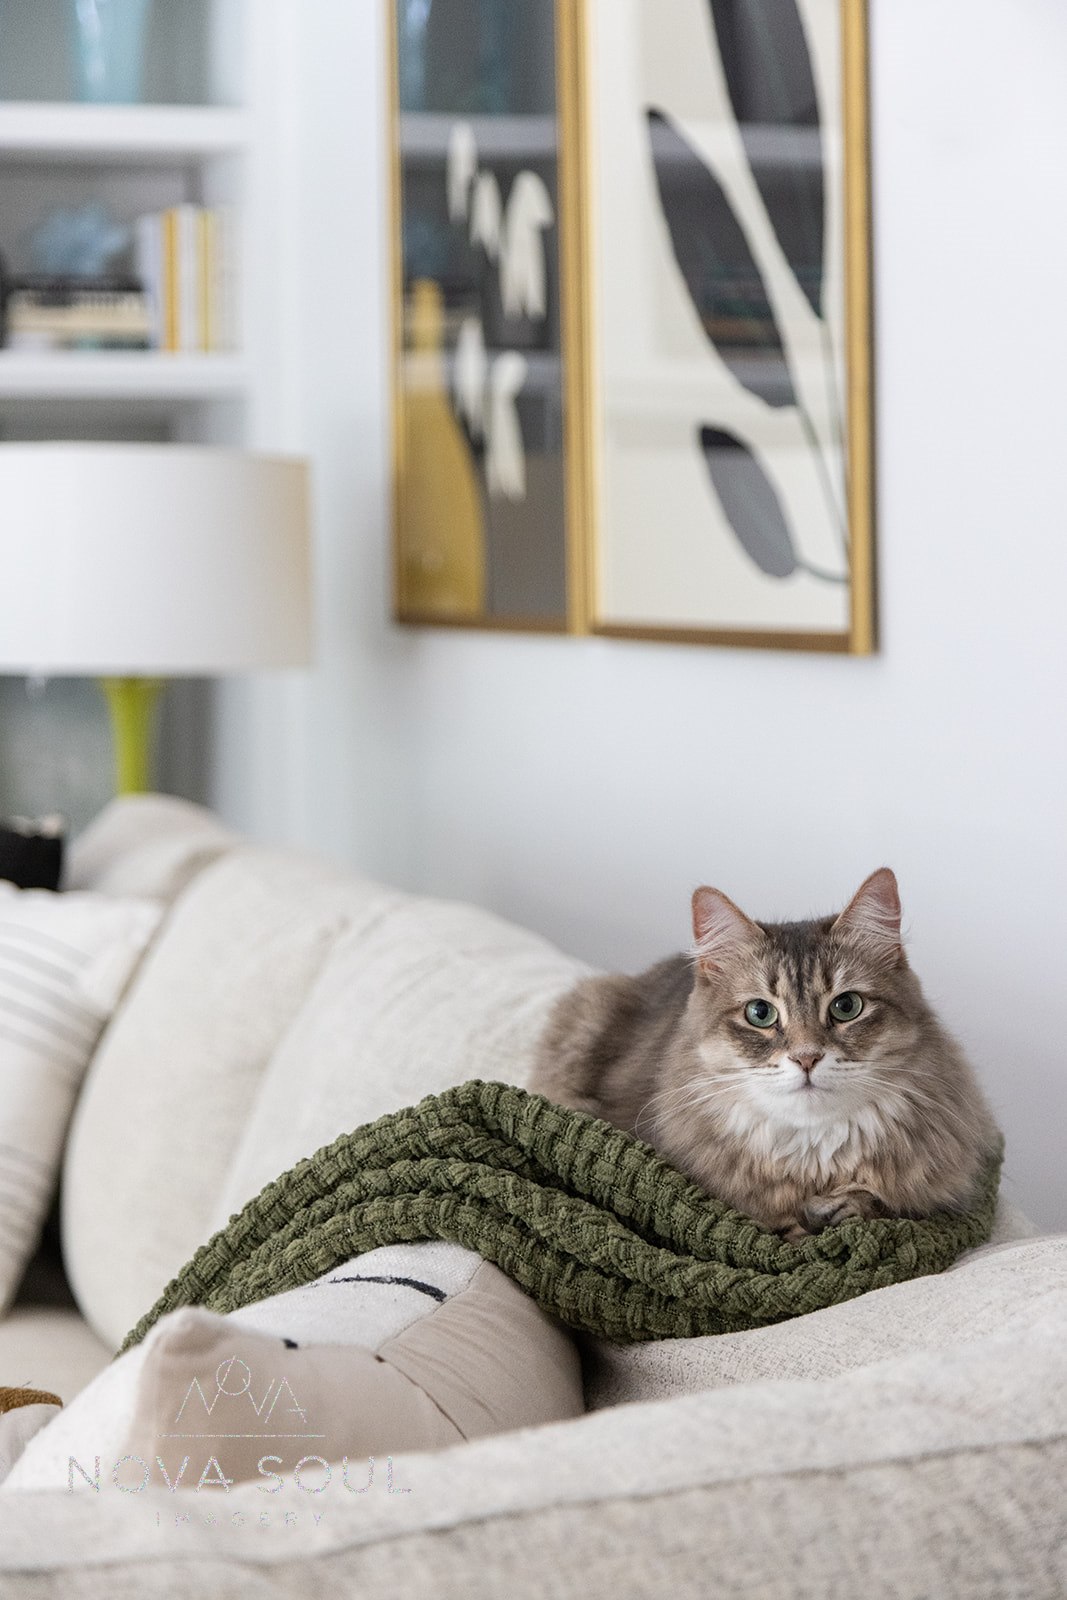 A Guide to Choosing Pet-Friendly Furniture for Your Stylish Space